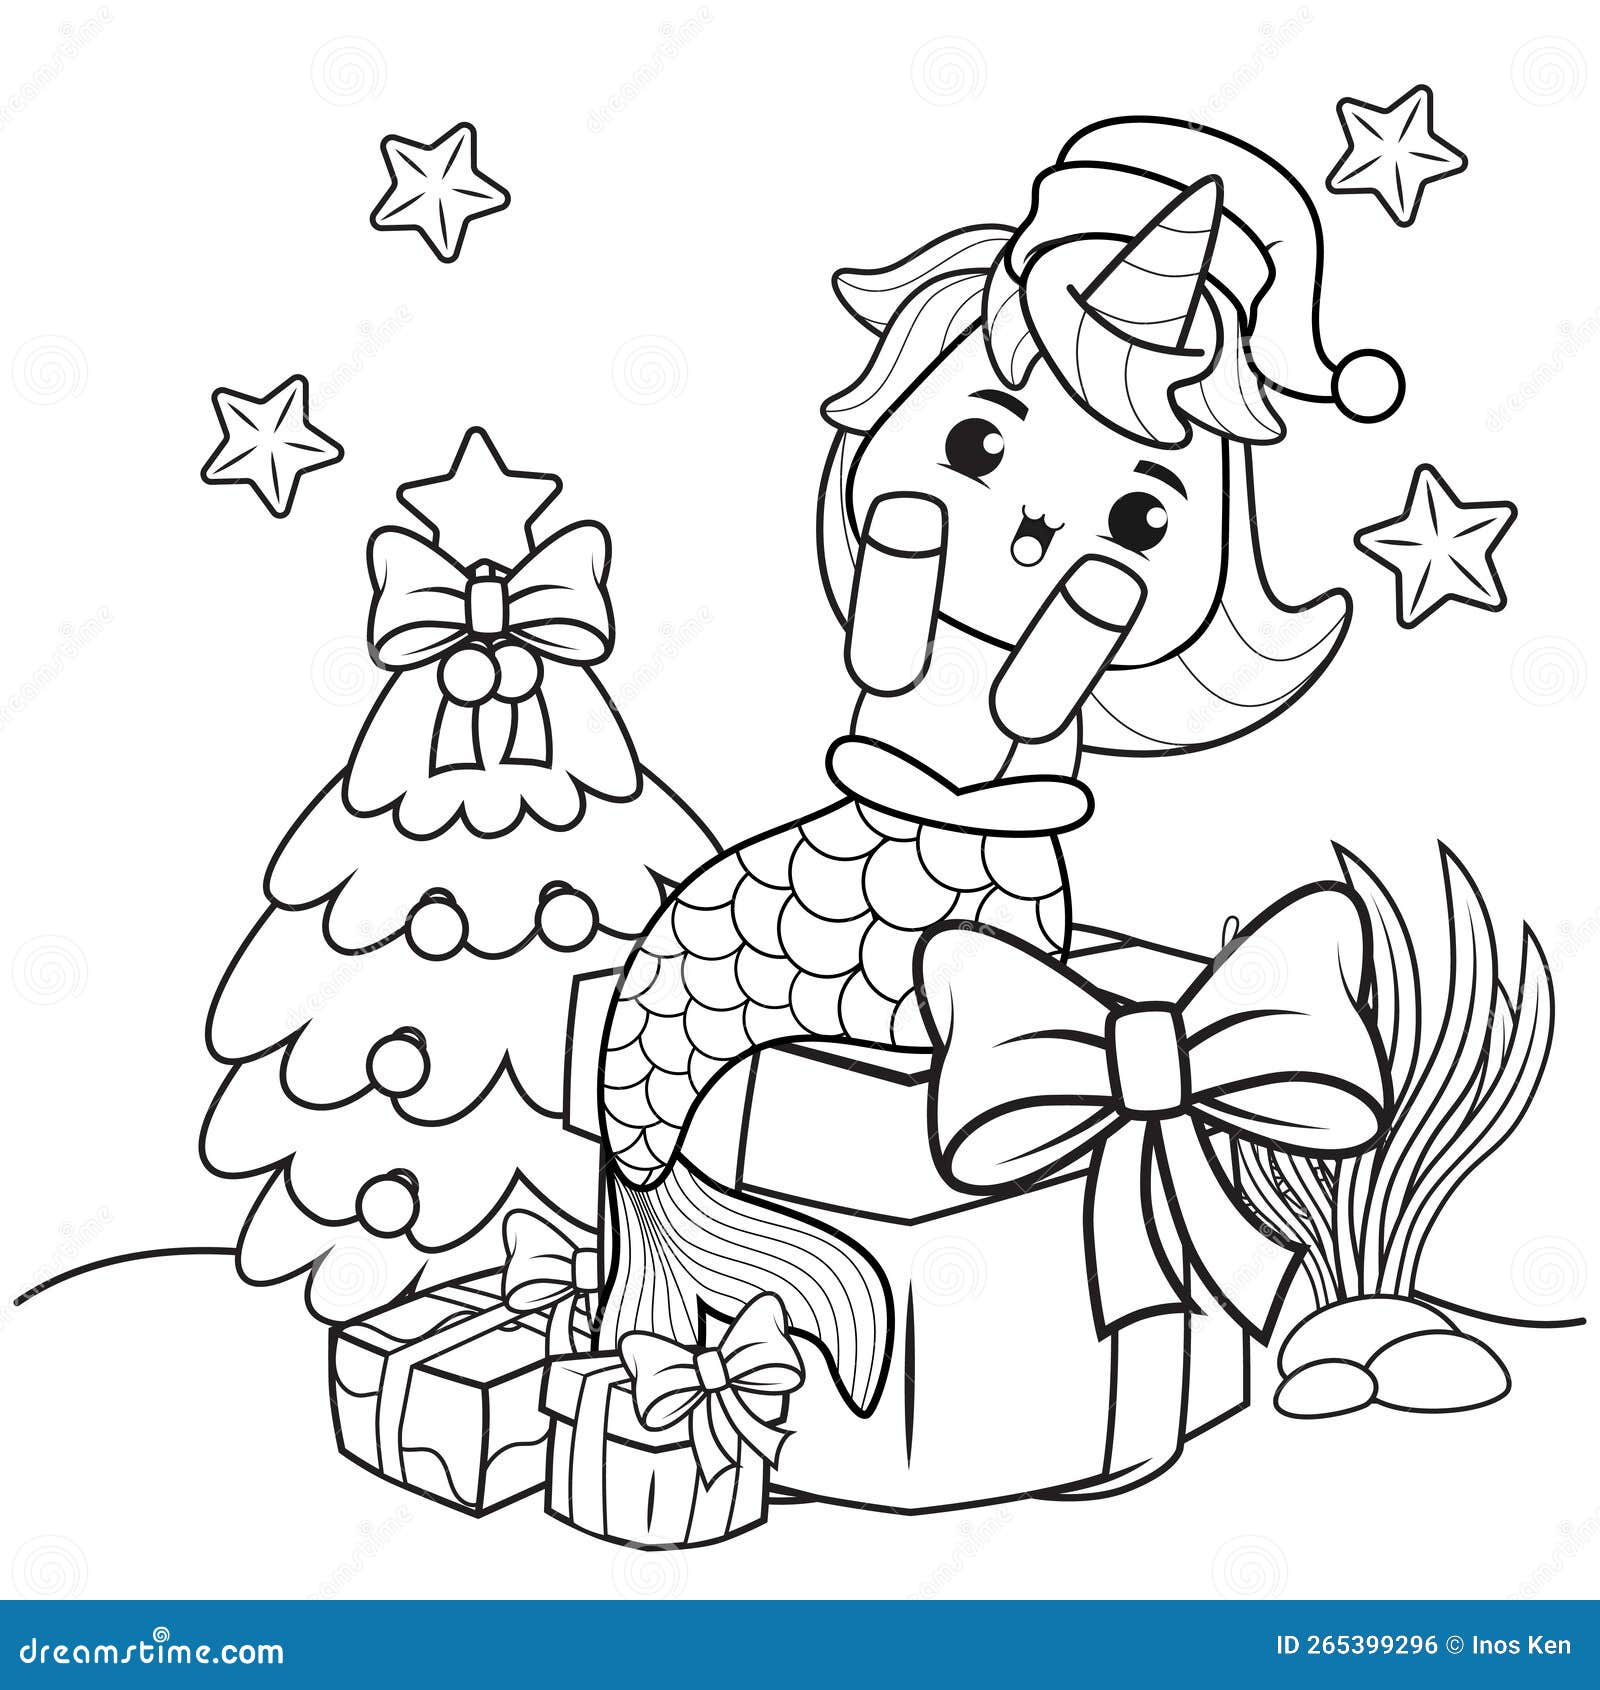 Christmas Coloring Book with Cute Unicorn Mermaid Stock Vector ...